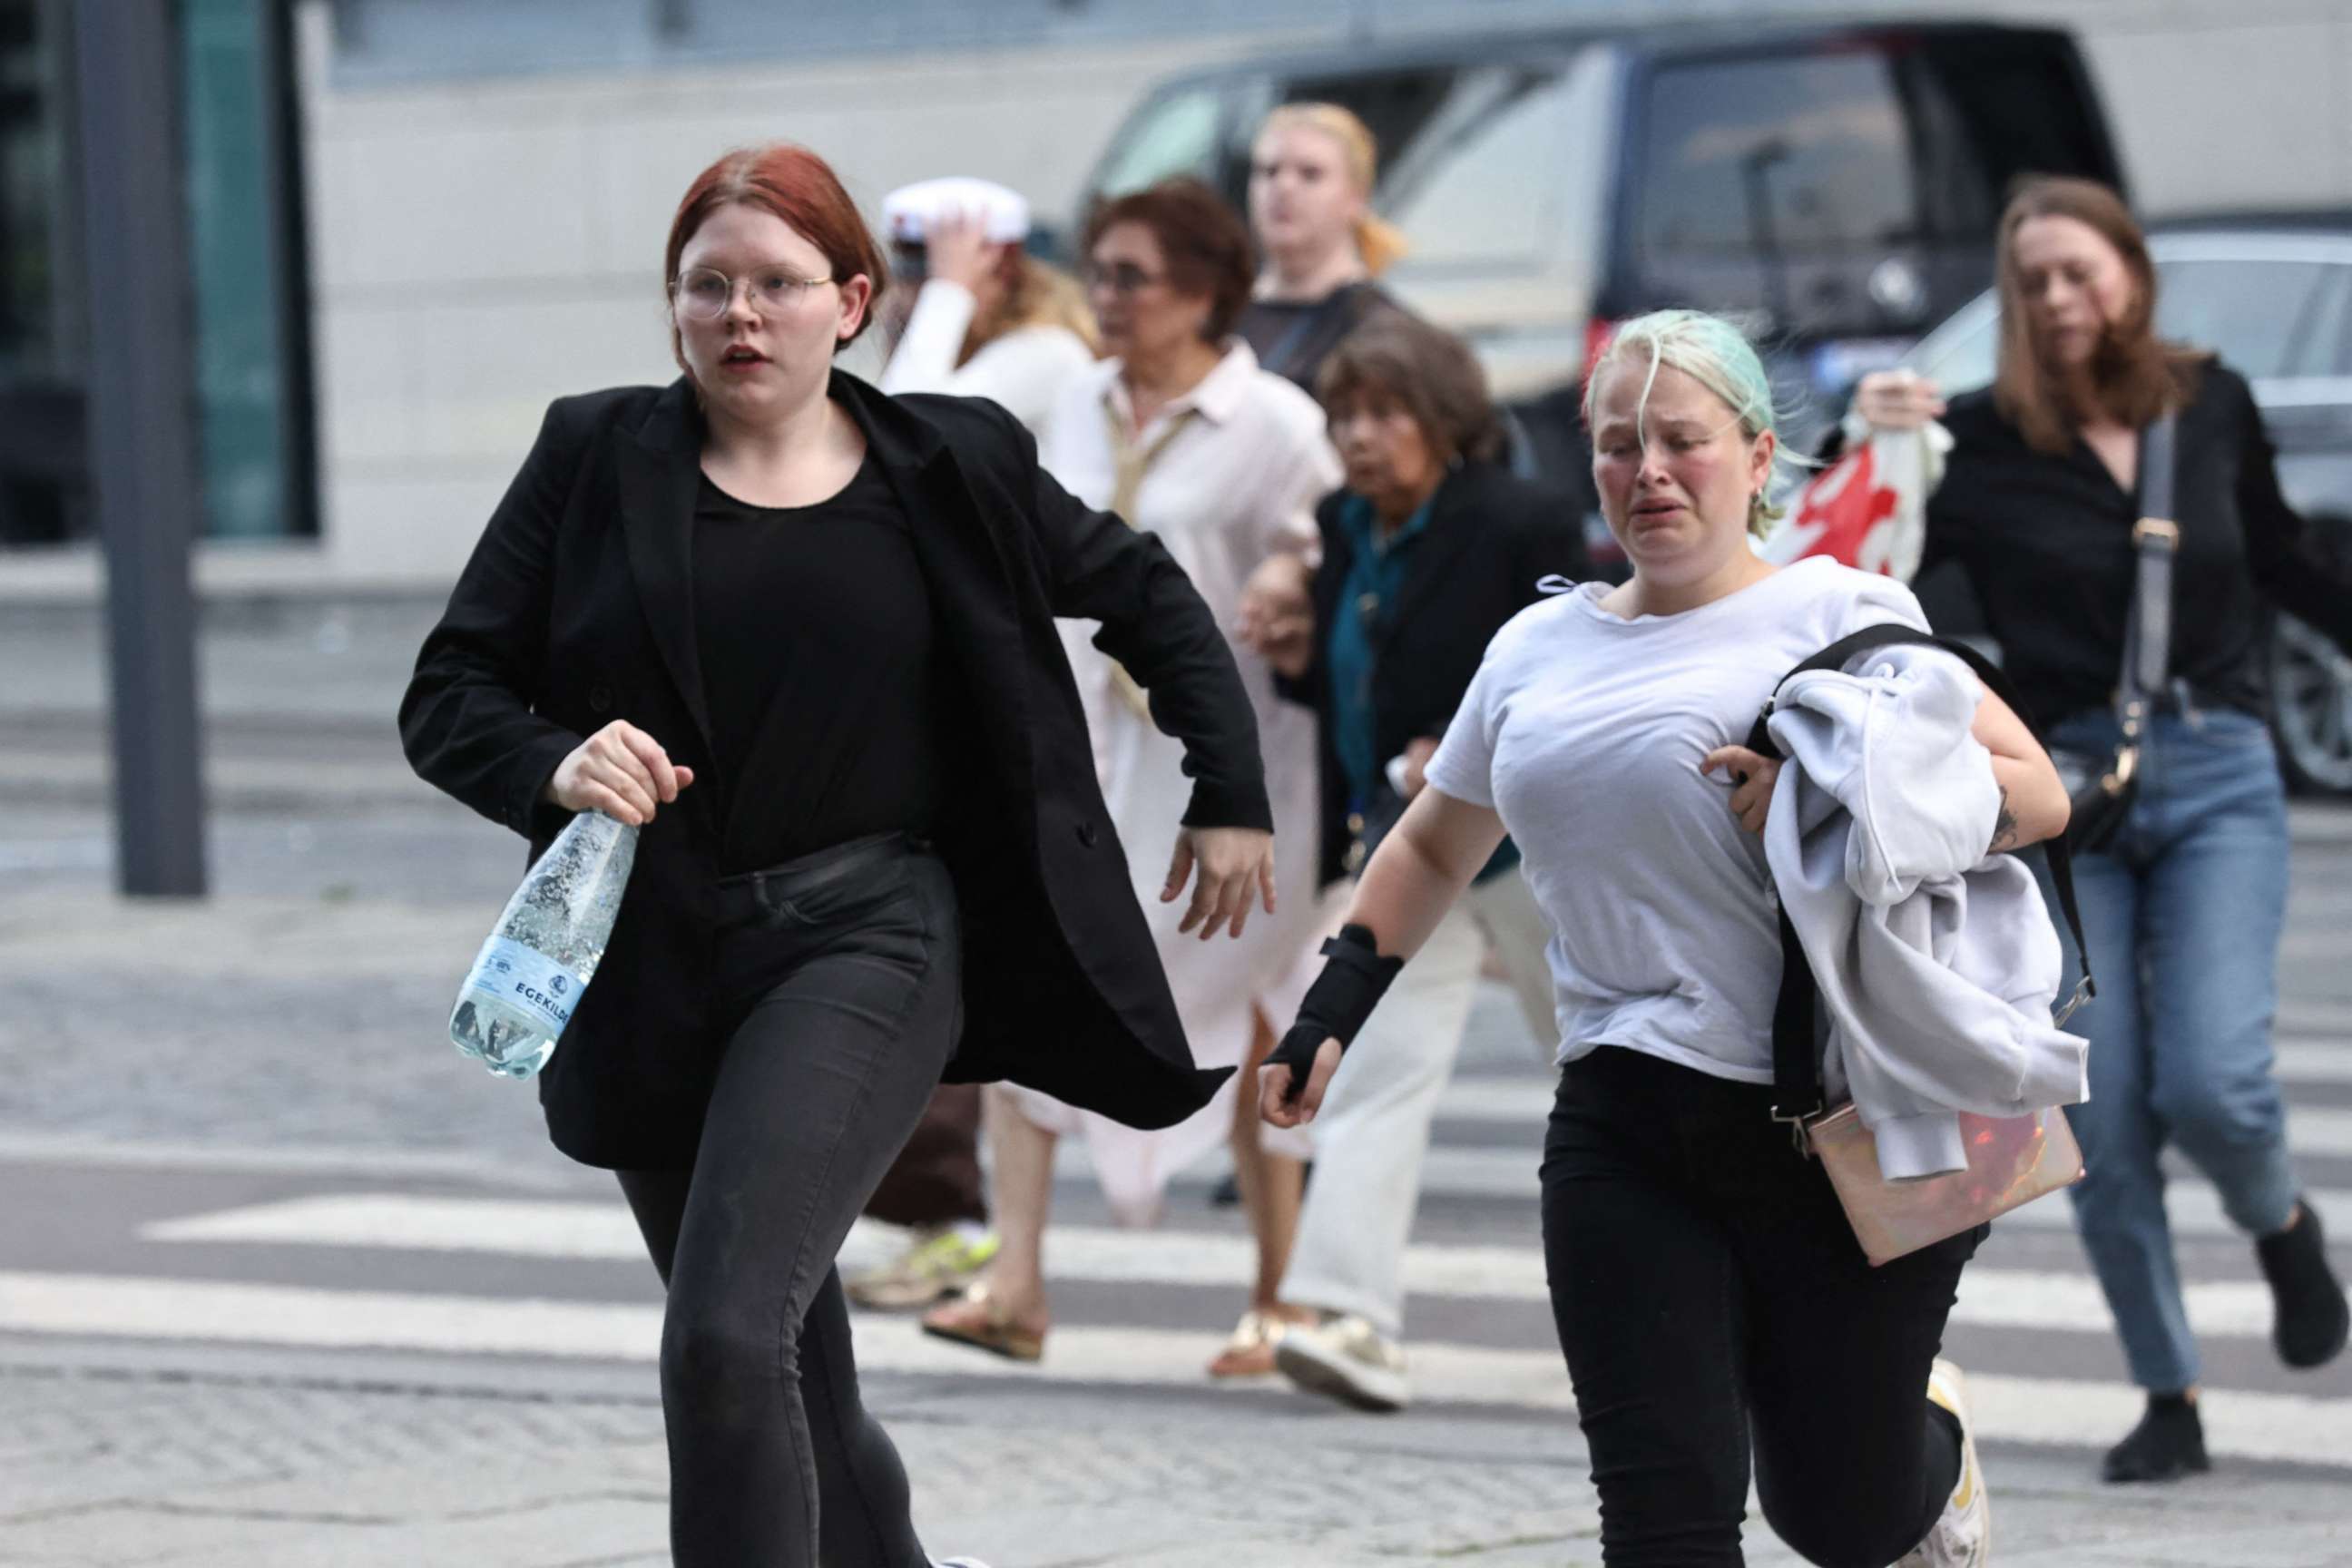 PHOTO: People are seen running during the evacuation of the Fields shopping center after reports of a shooting in Copenhagen, Denmark, on July 3, 2022.